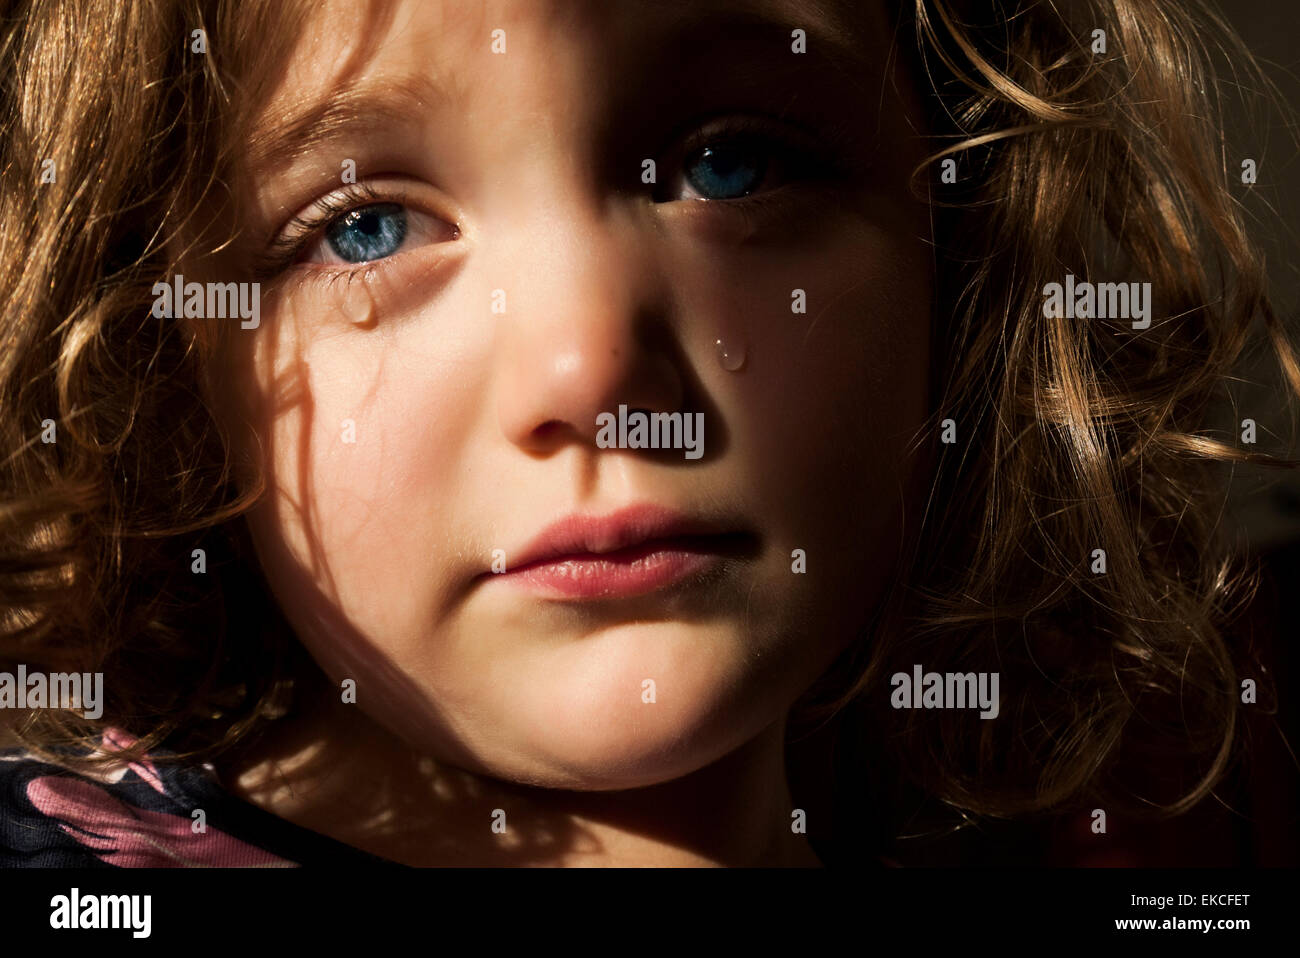 Portrait of a sad girl with piercing blue eyes crying Stock Photo